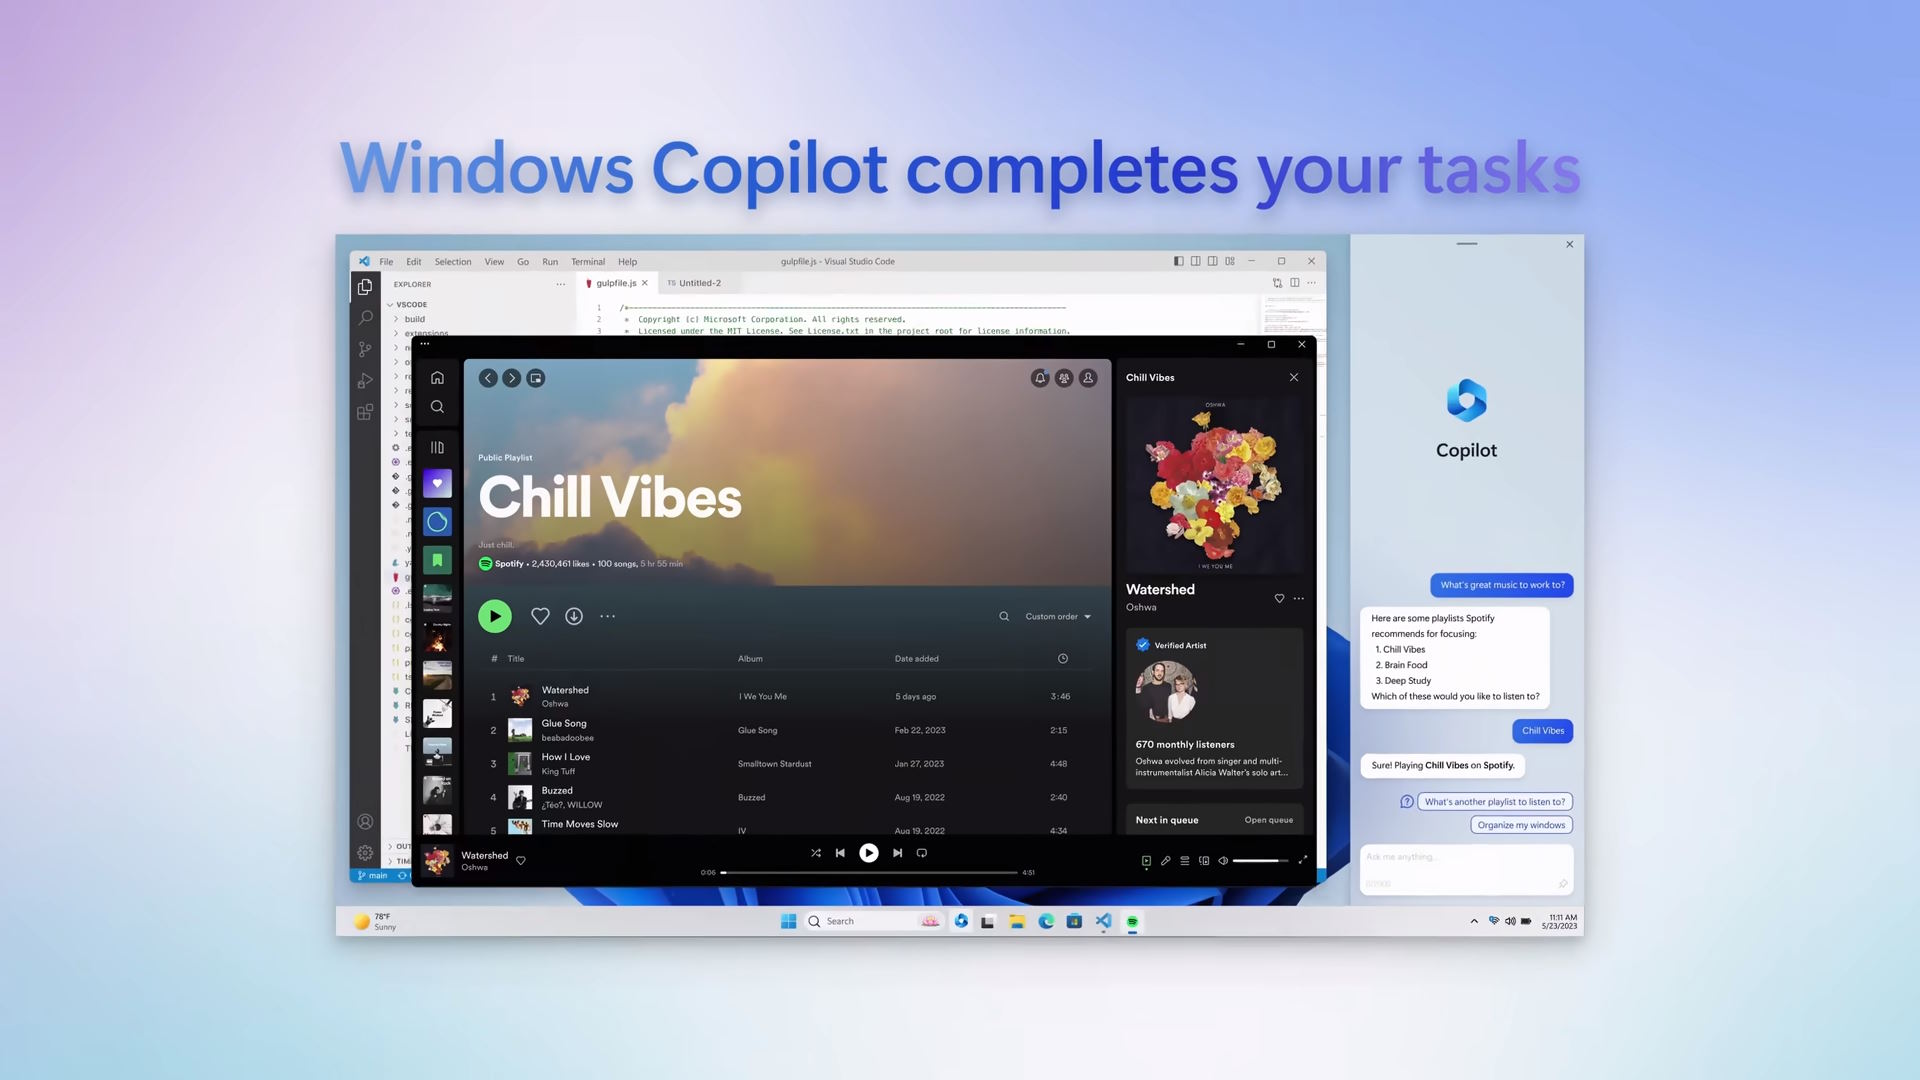 Windows Copilot arrives on September 26 with the 23H2 update